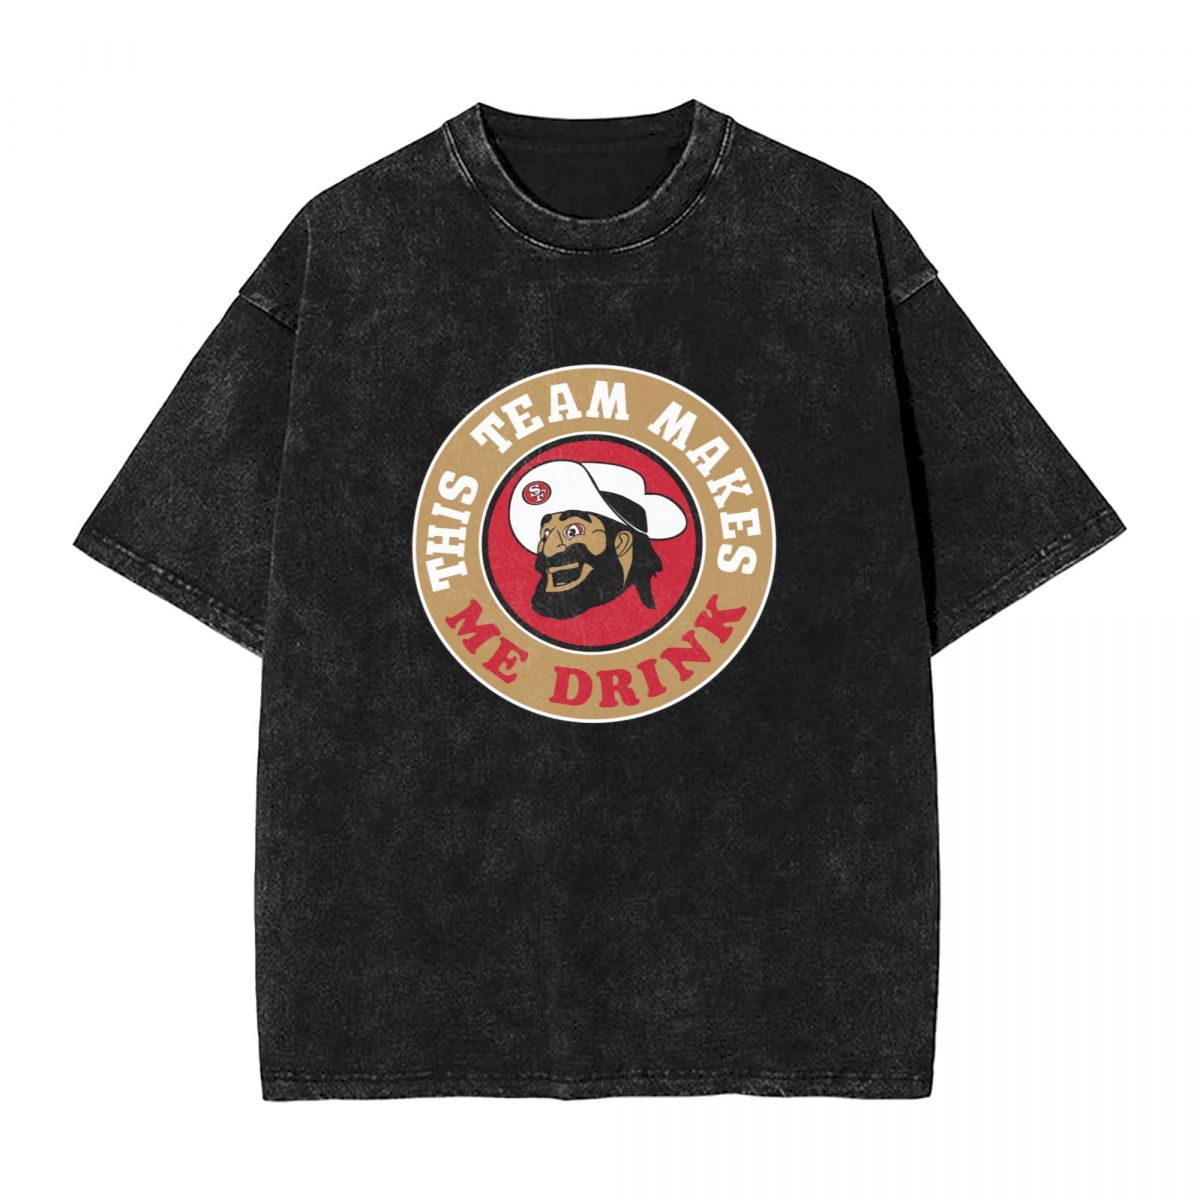 San Francisco 49ers This Team Makes Me Drink Men's Oversized Streetwear Tee Shirts